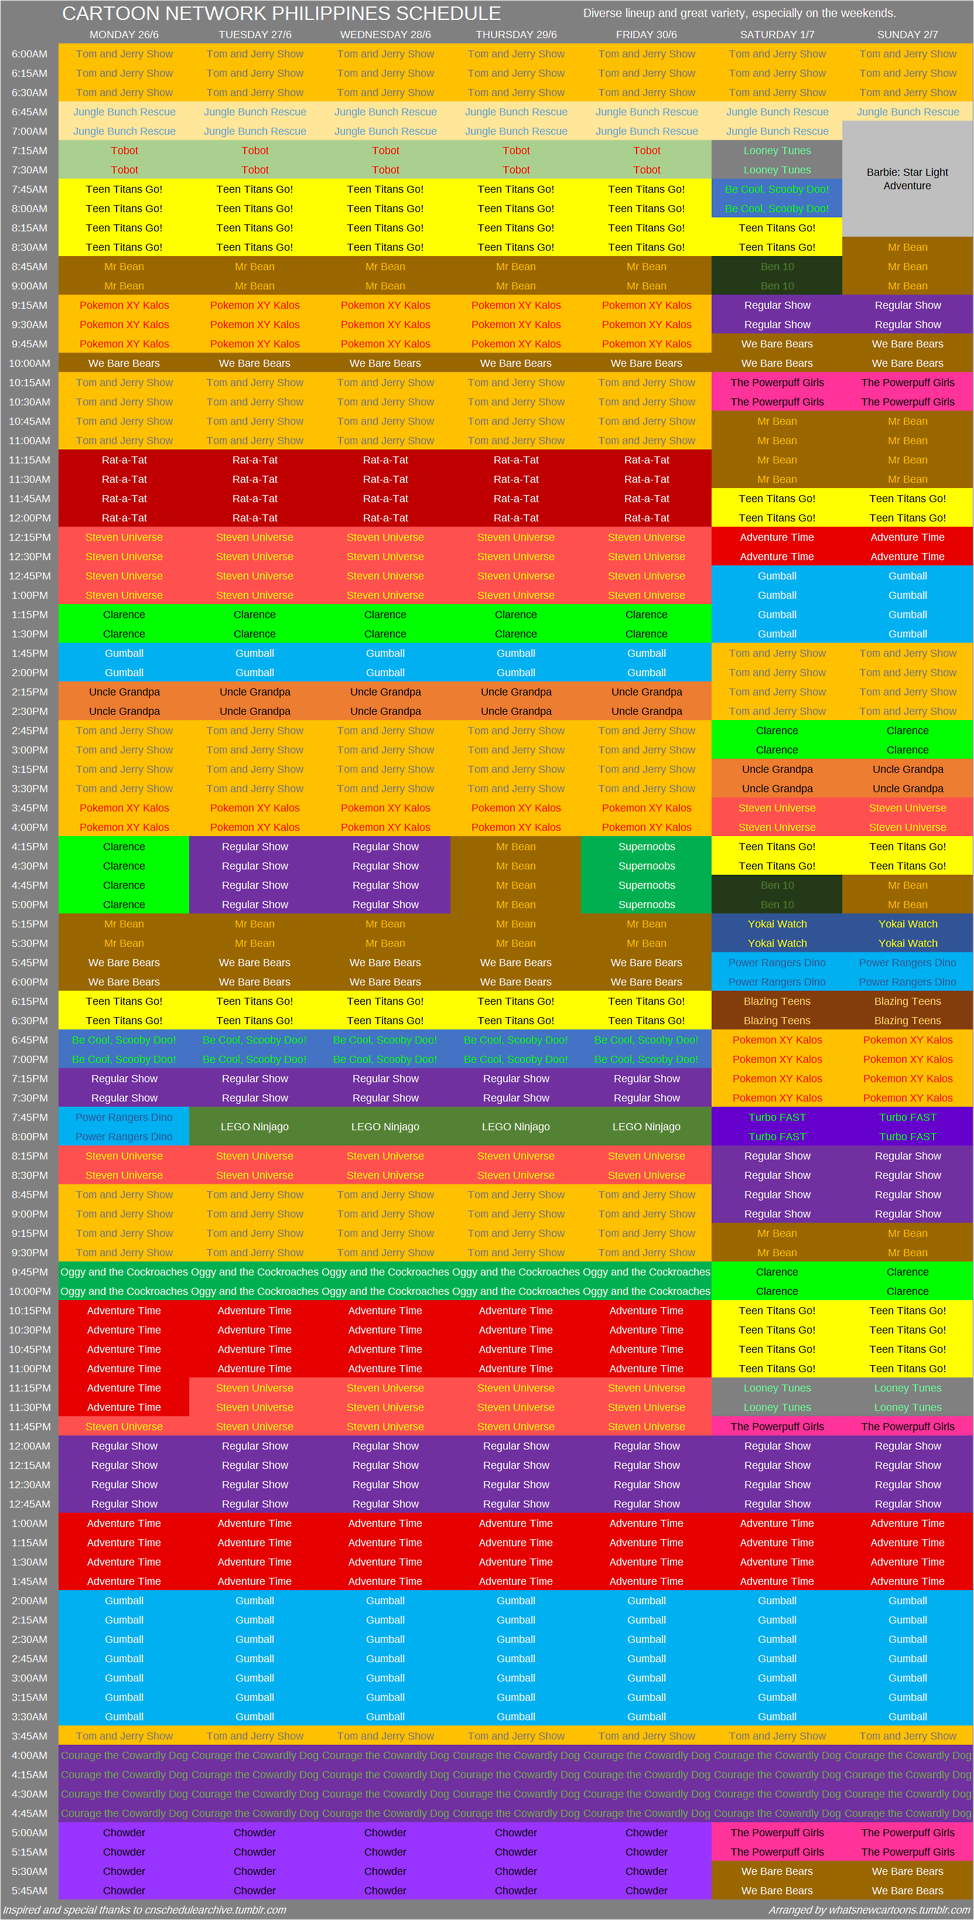 WHAT'S NEW CARTOONS? cartoon premieres and ratings — Here's Cartoon Network  Philippines' schedule for...